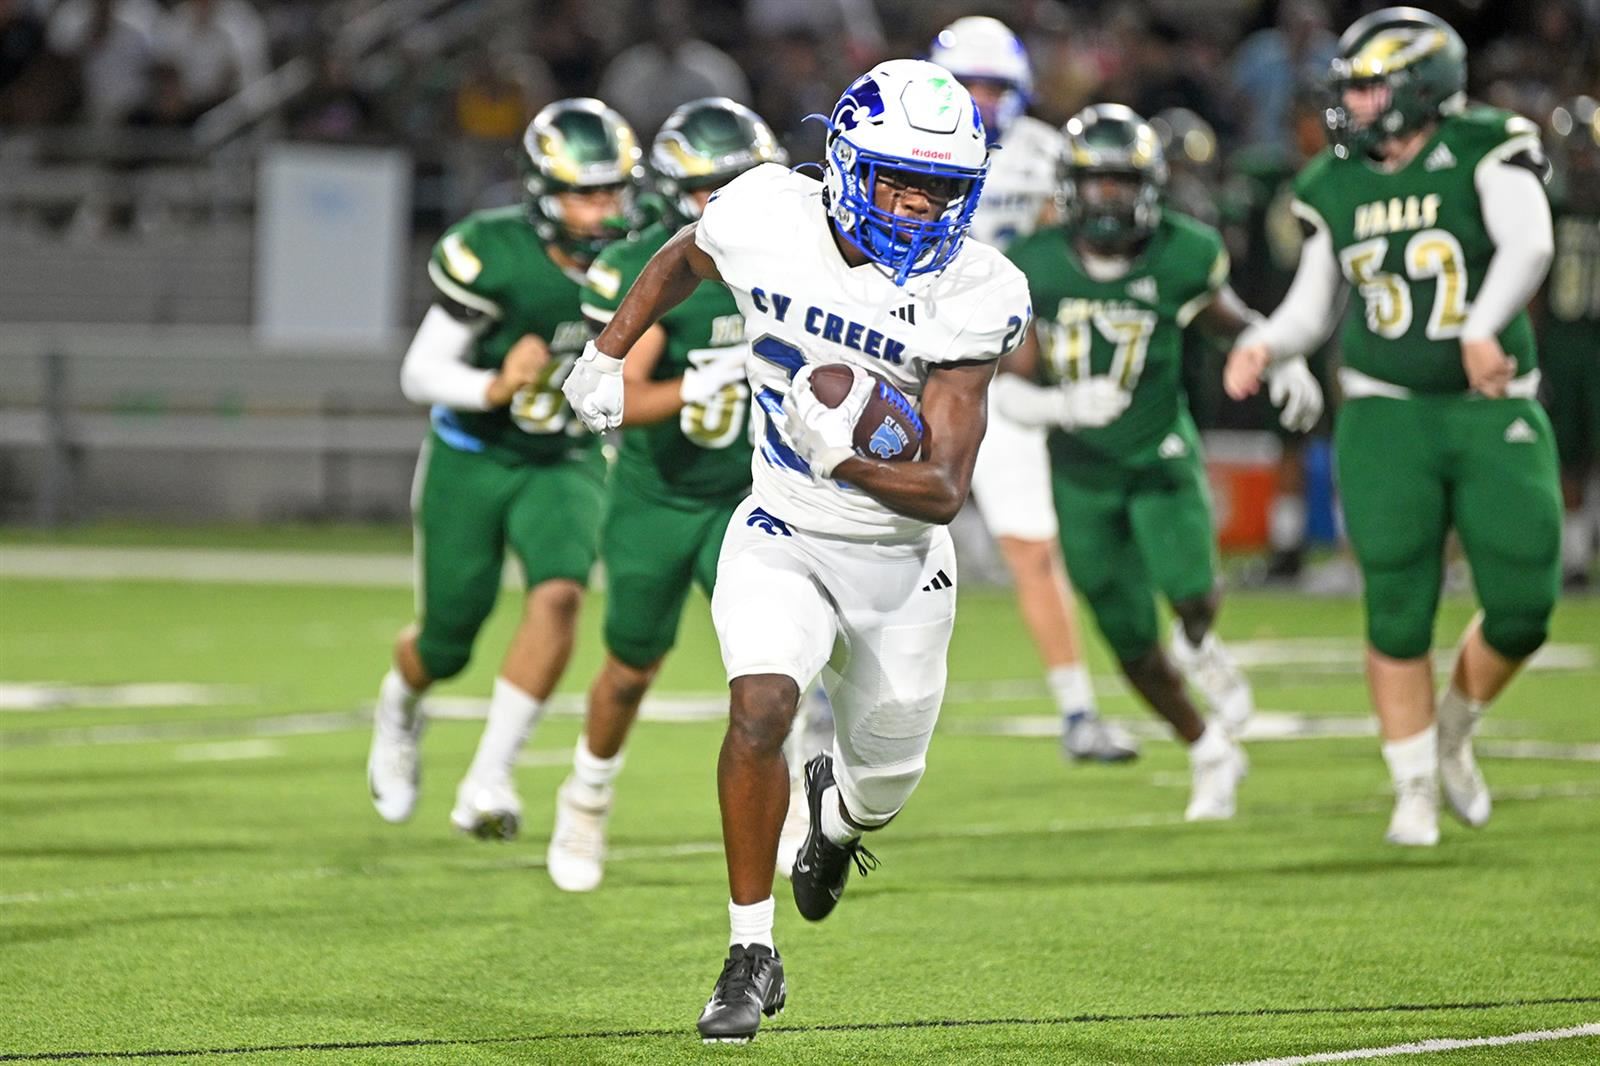 Cy Creek sophomore running back Garland Wilburn was unanimously voted as the District 17-6A Offensive Newcomer of the Year.